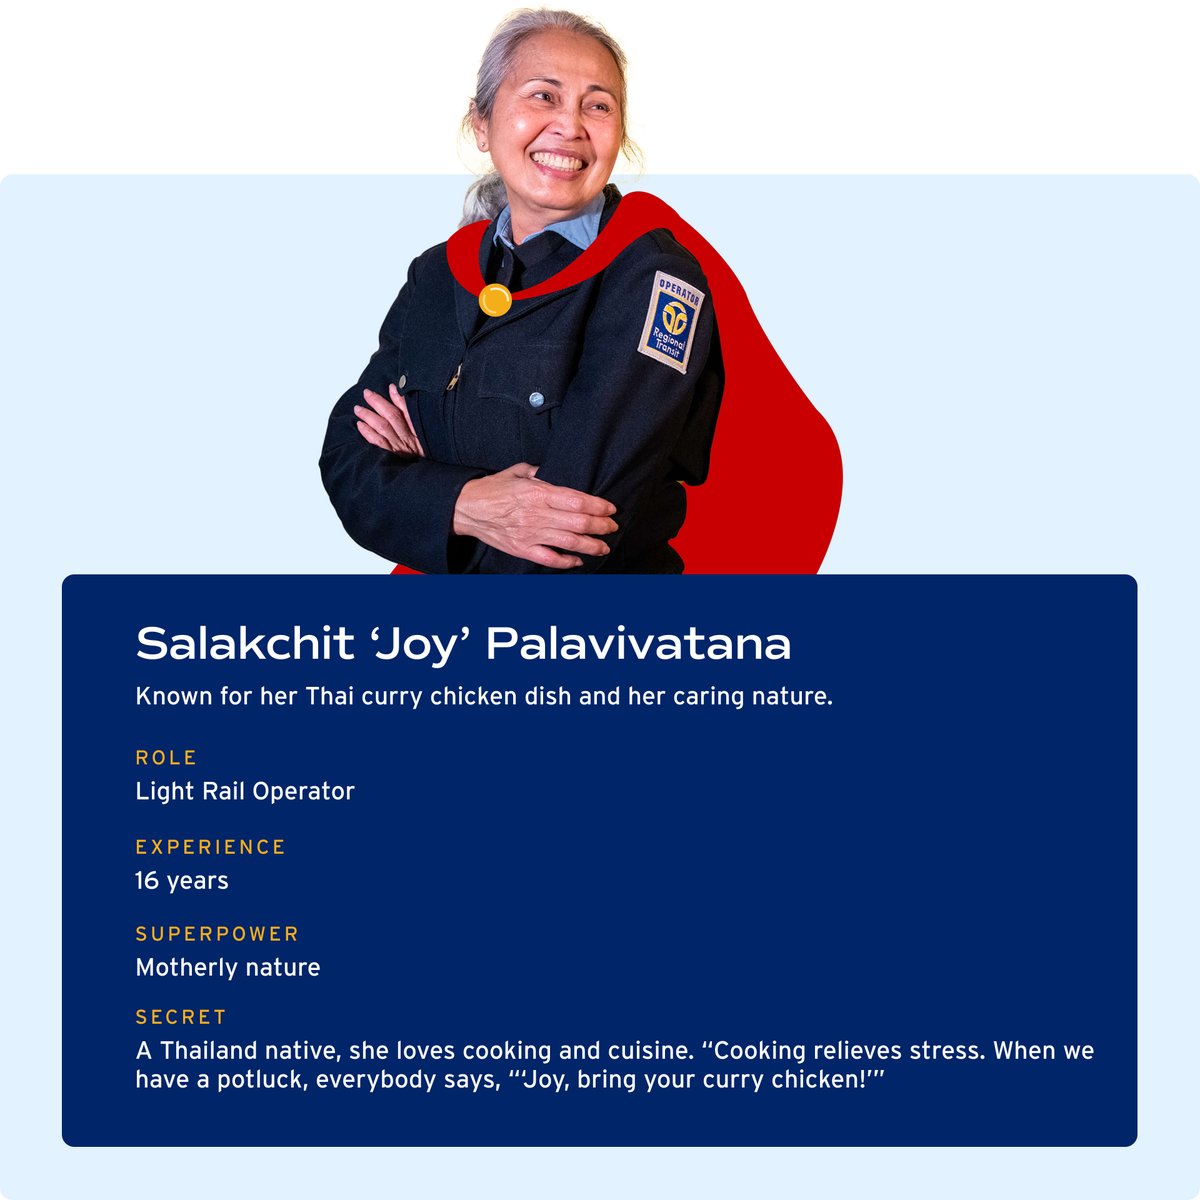 Today, we shine the spotlight on 'Joy,' one of our remarkable SacRT Transit Heroes. Salakchit 'Joy' Palavivatana has been a Light Rail Operator for SacRT for an impressive 16 years. Discover more captivating tales at sacrt.com/transithero. #SacRTTransitHero